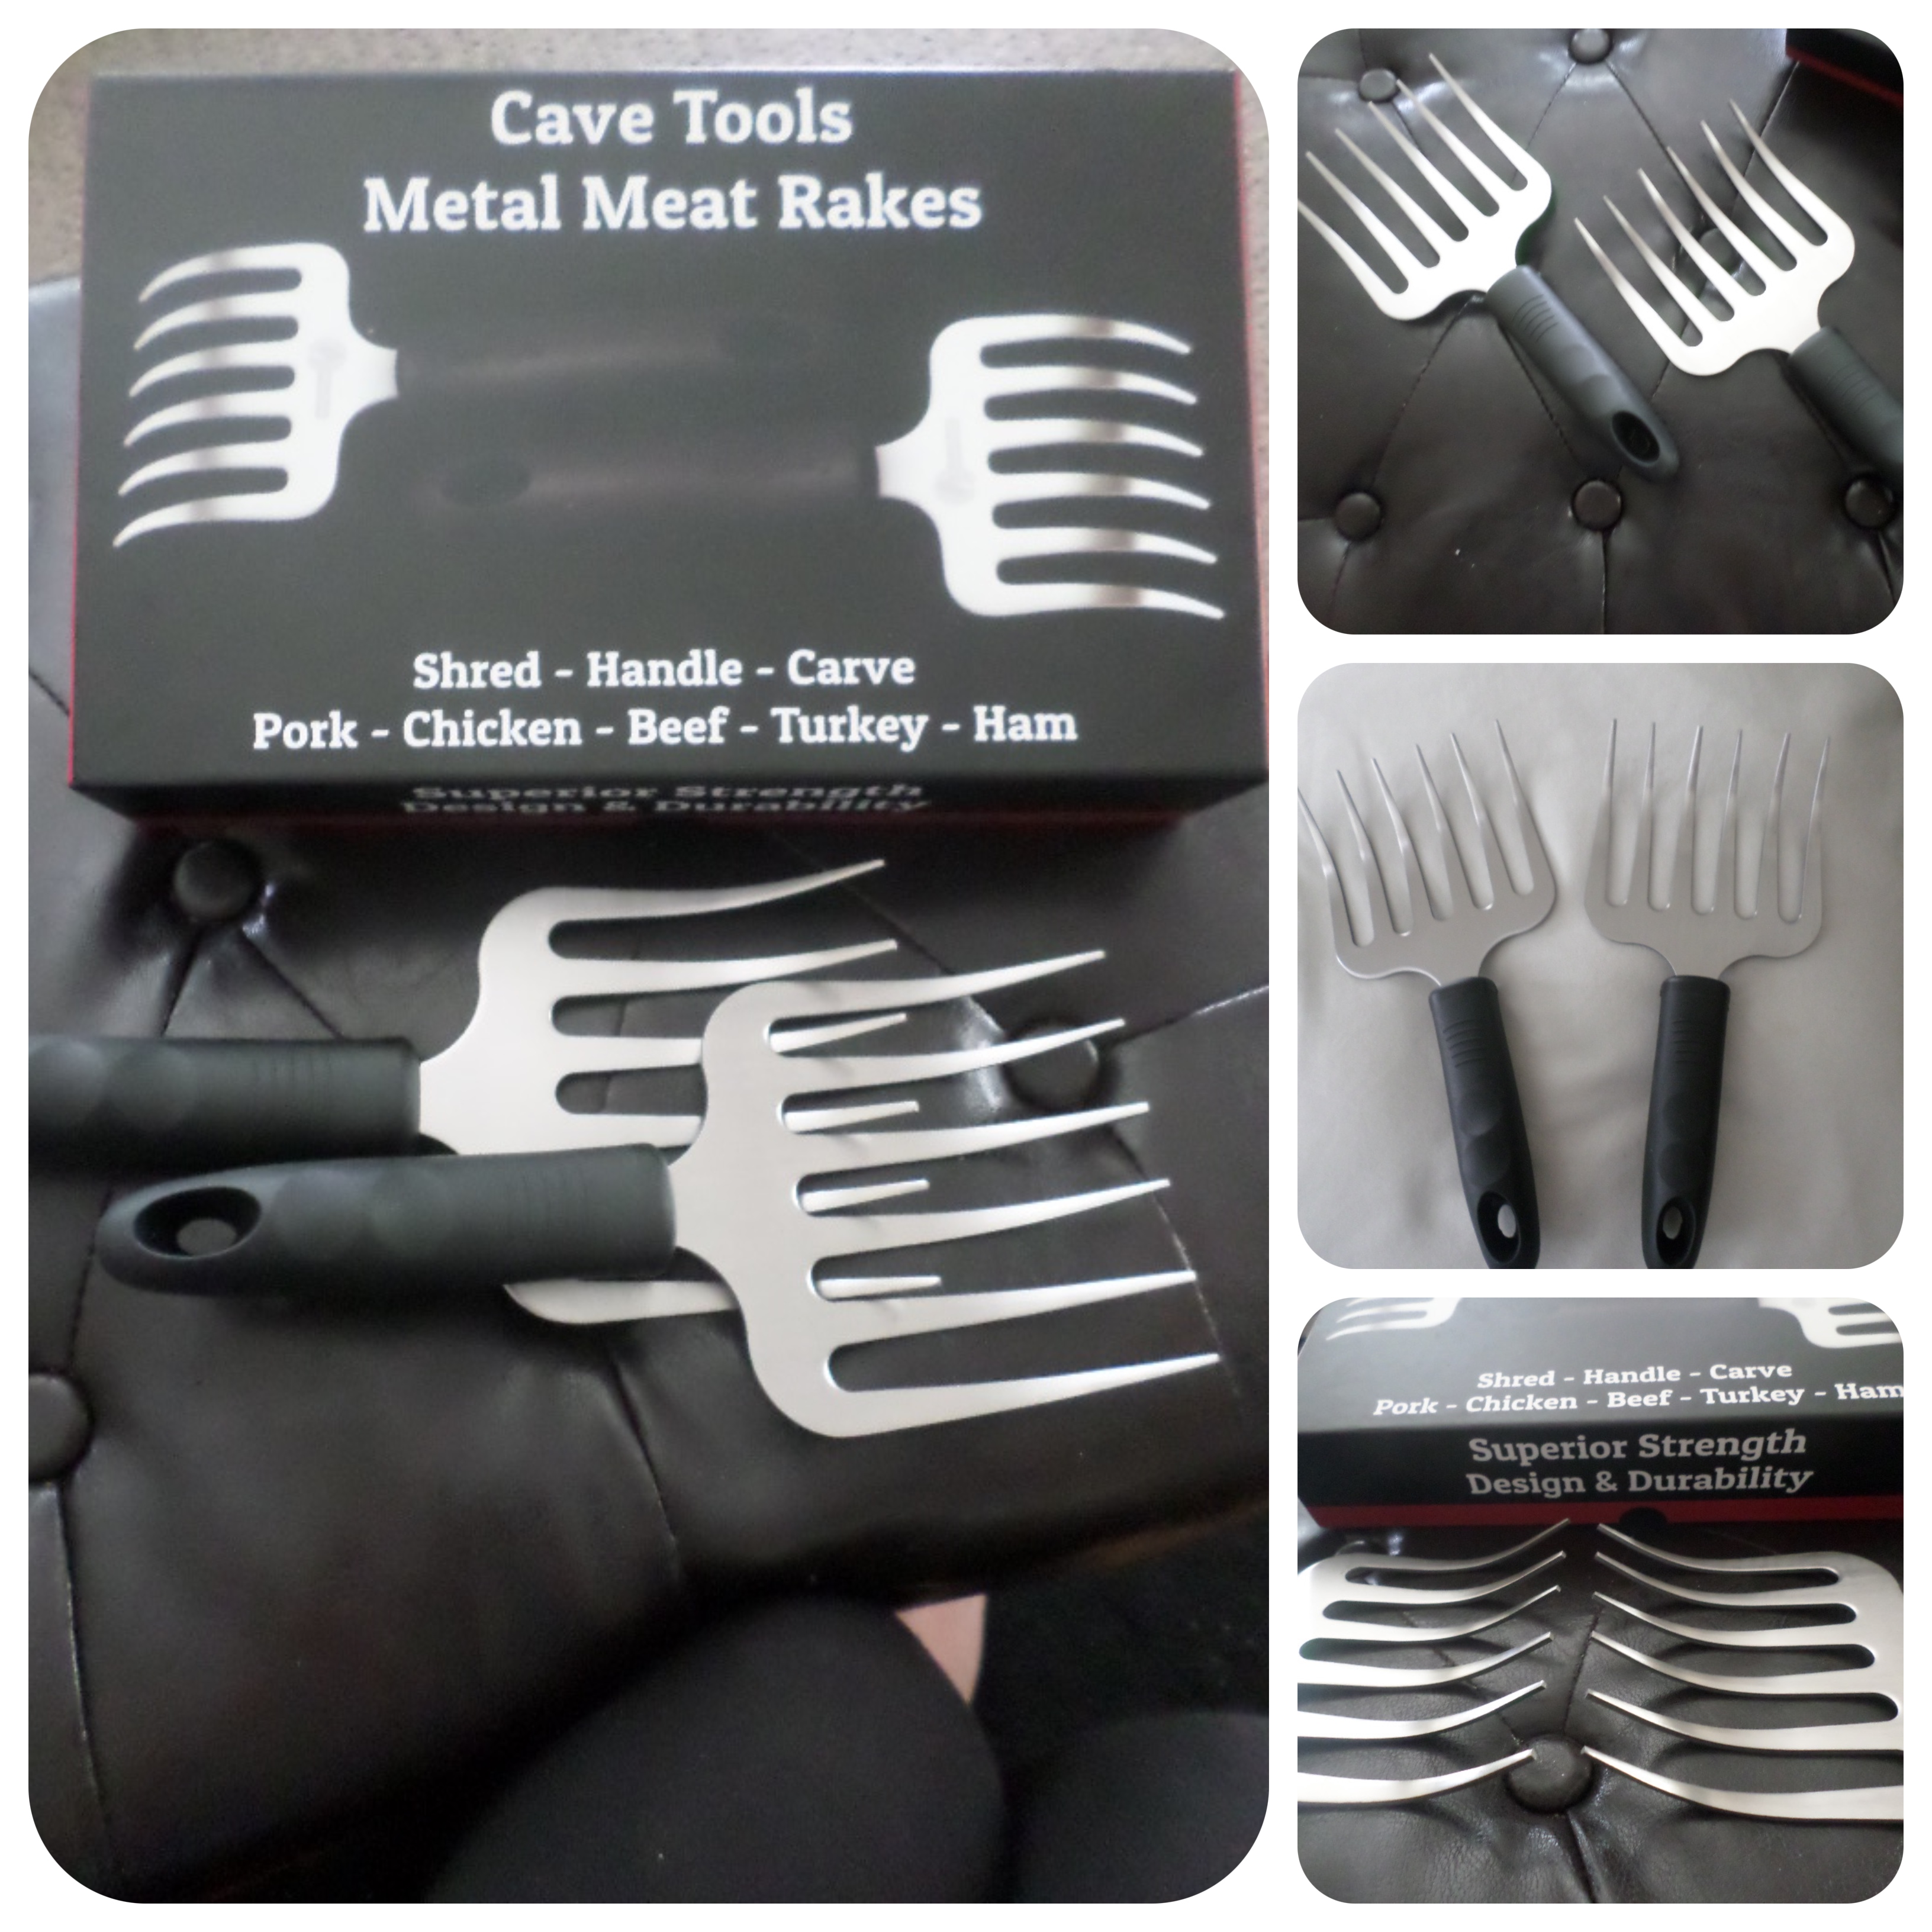 Cave Tools Meat Rakes